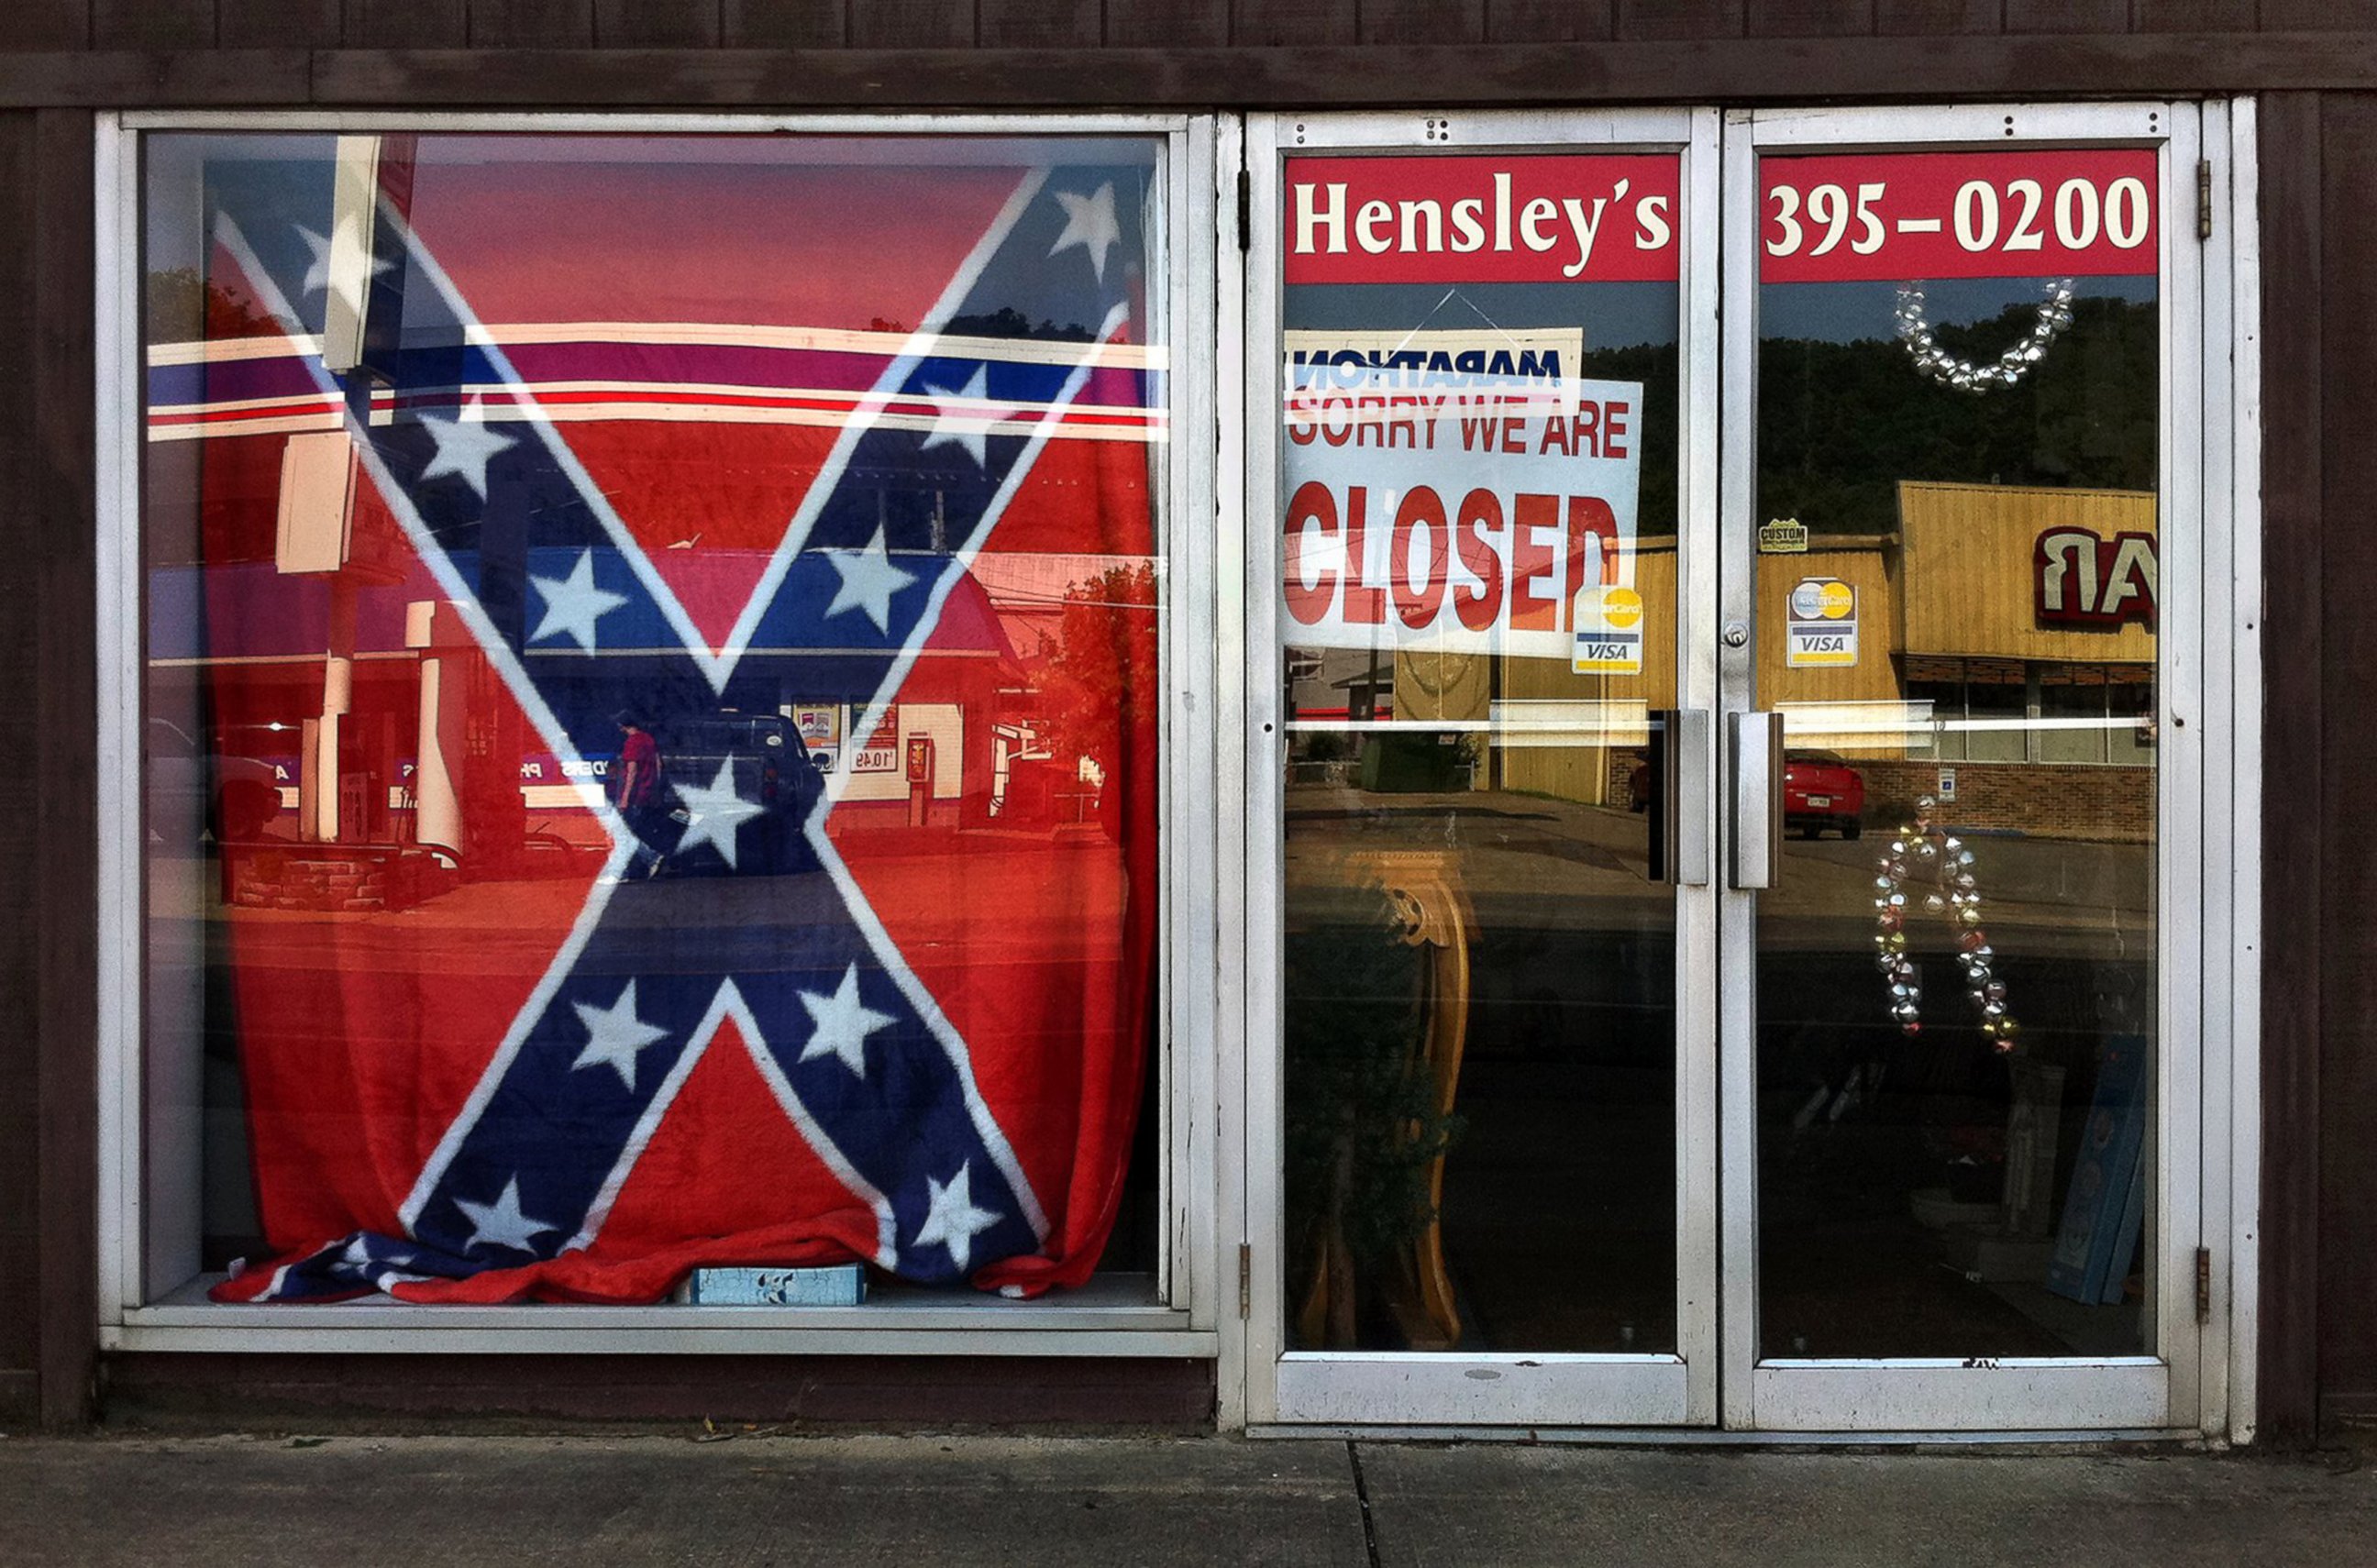 PHOTO: A Confederate flag covers a window of a store in a small town in Georgia on June 21, 2015.